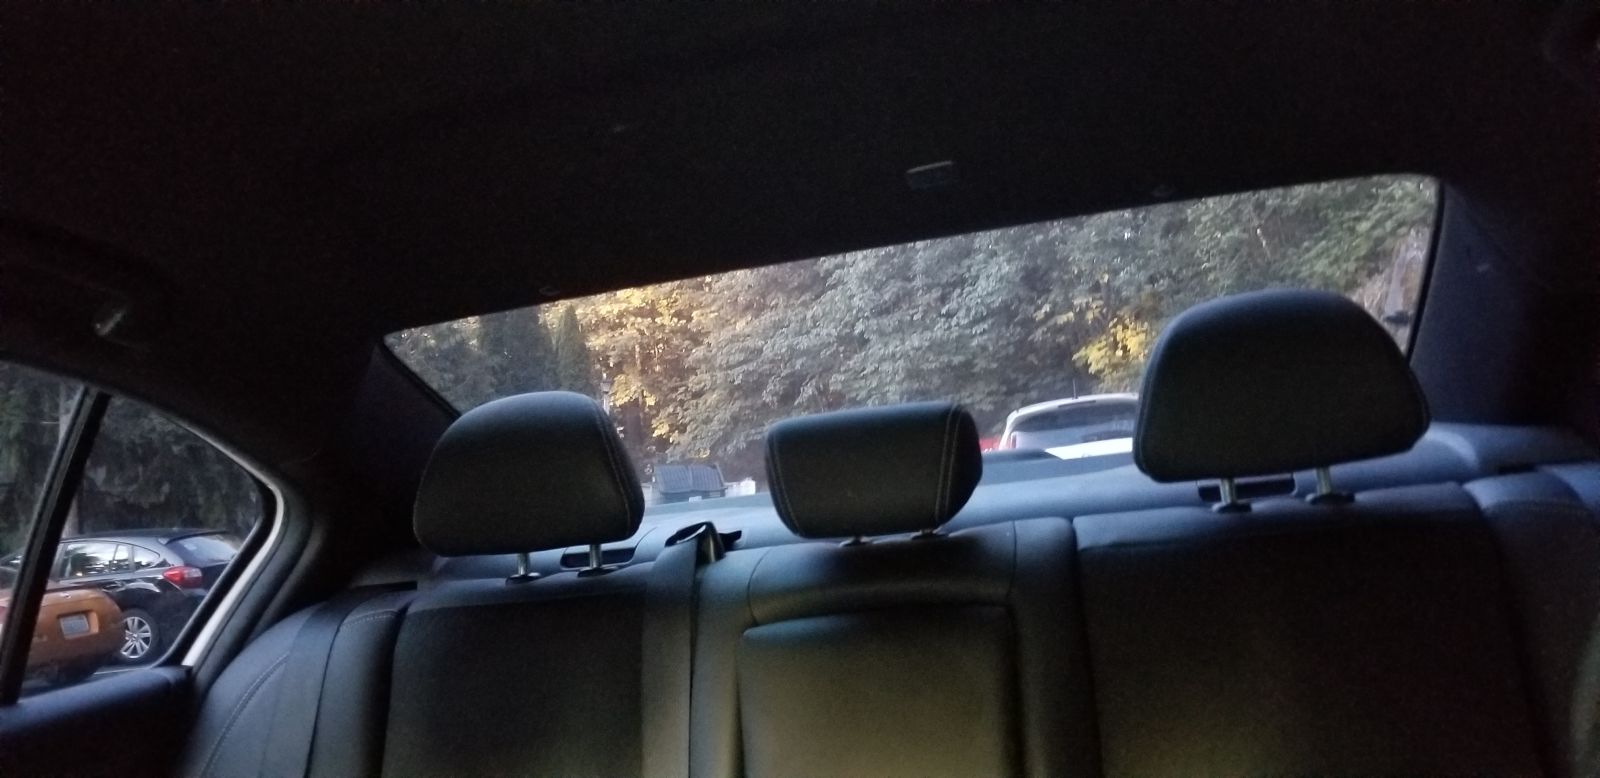 This was taken at eye level, and represents a fairly accurate view of what I see when I turn around. Which is not a whole lot. Look at how high up the end of the trunk lid is. 